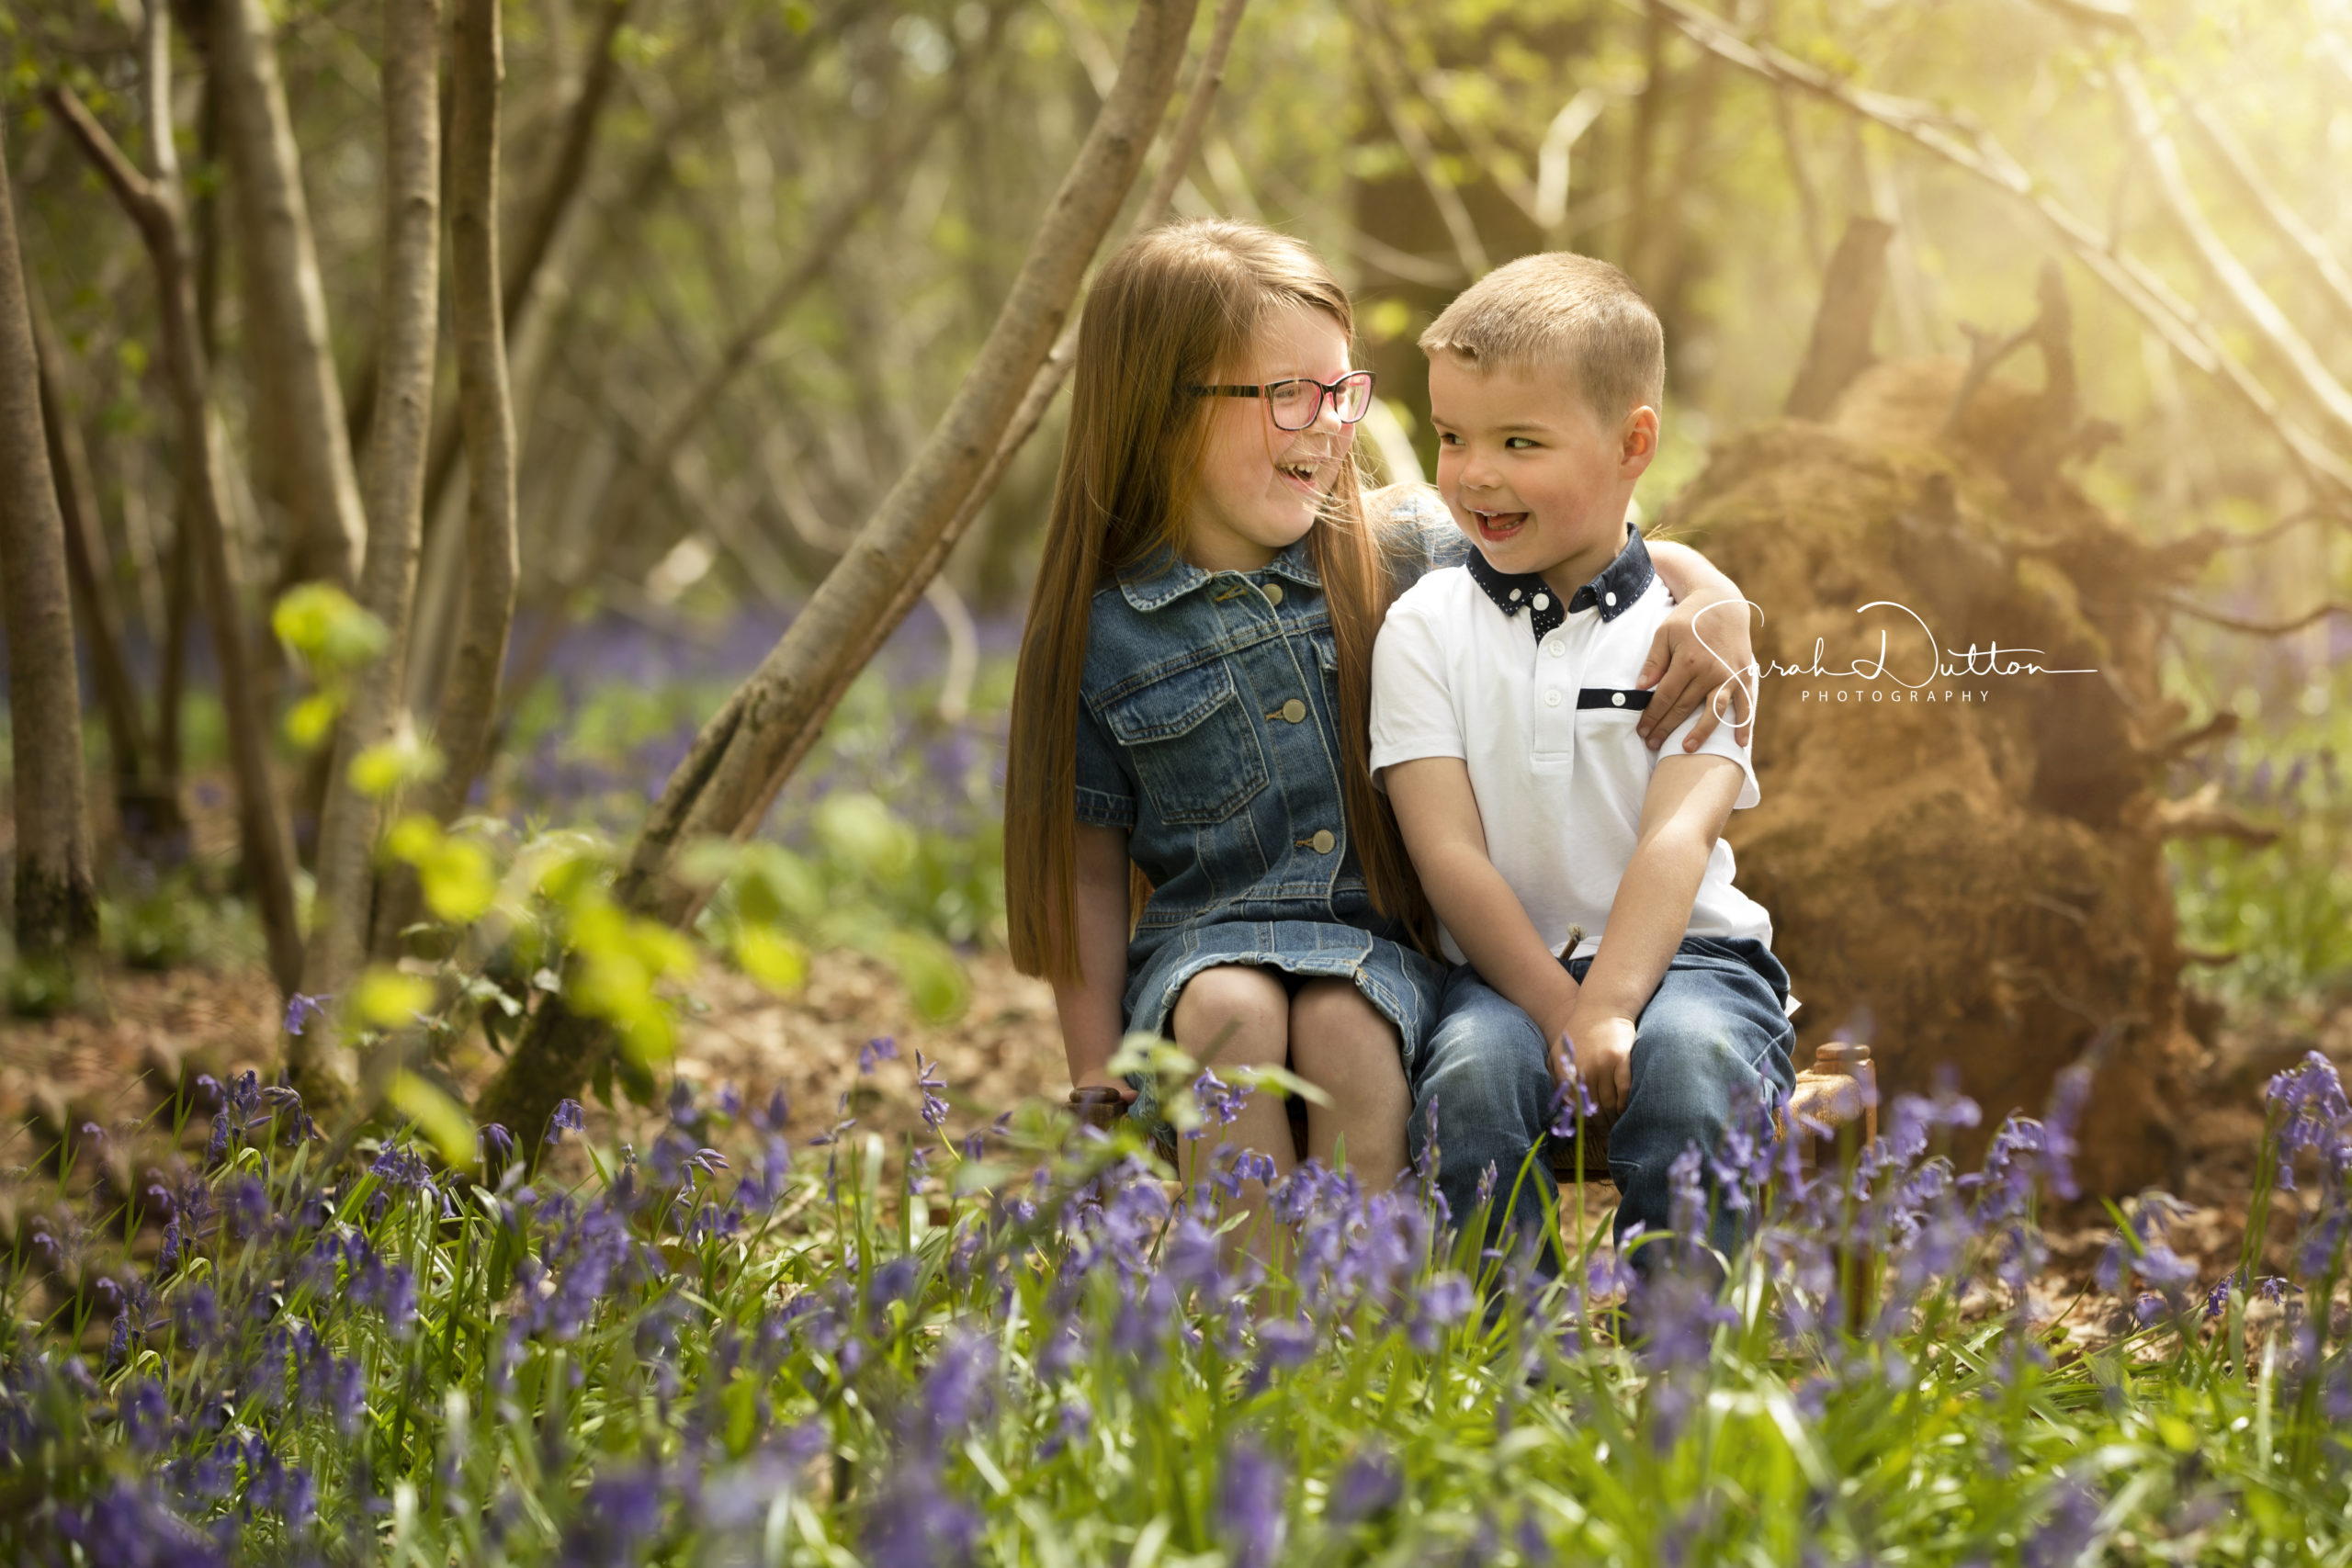 Family photoshoot taken in the Bluebell woods by a professional photographer in Basingstoke Hamsphire